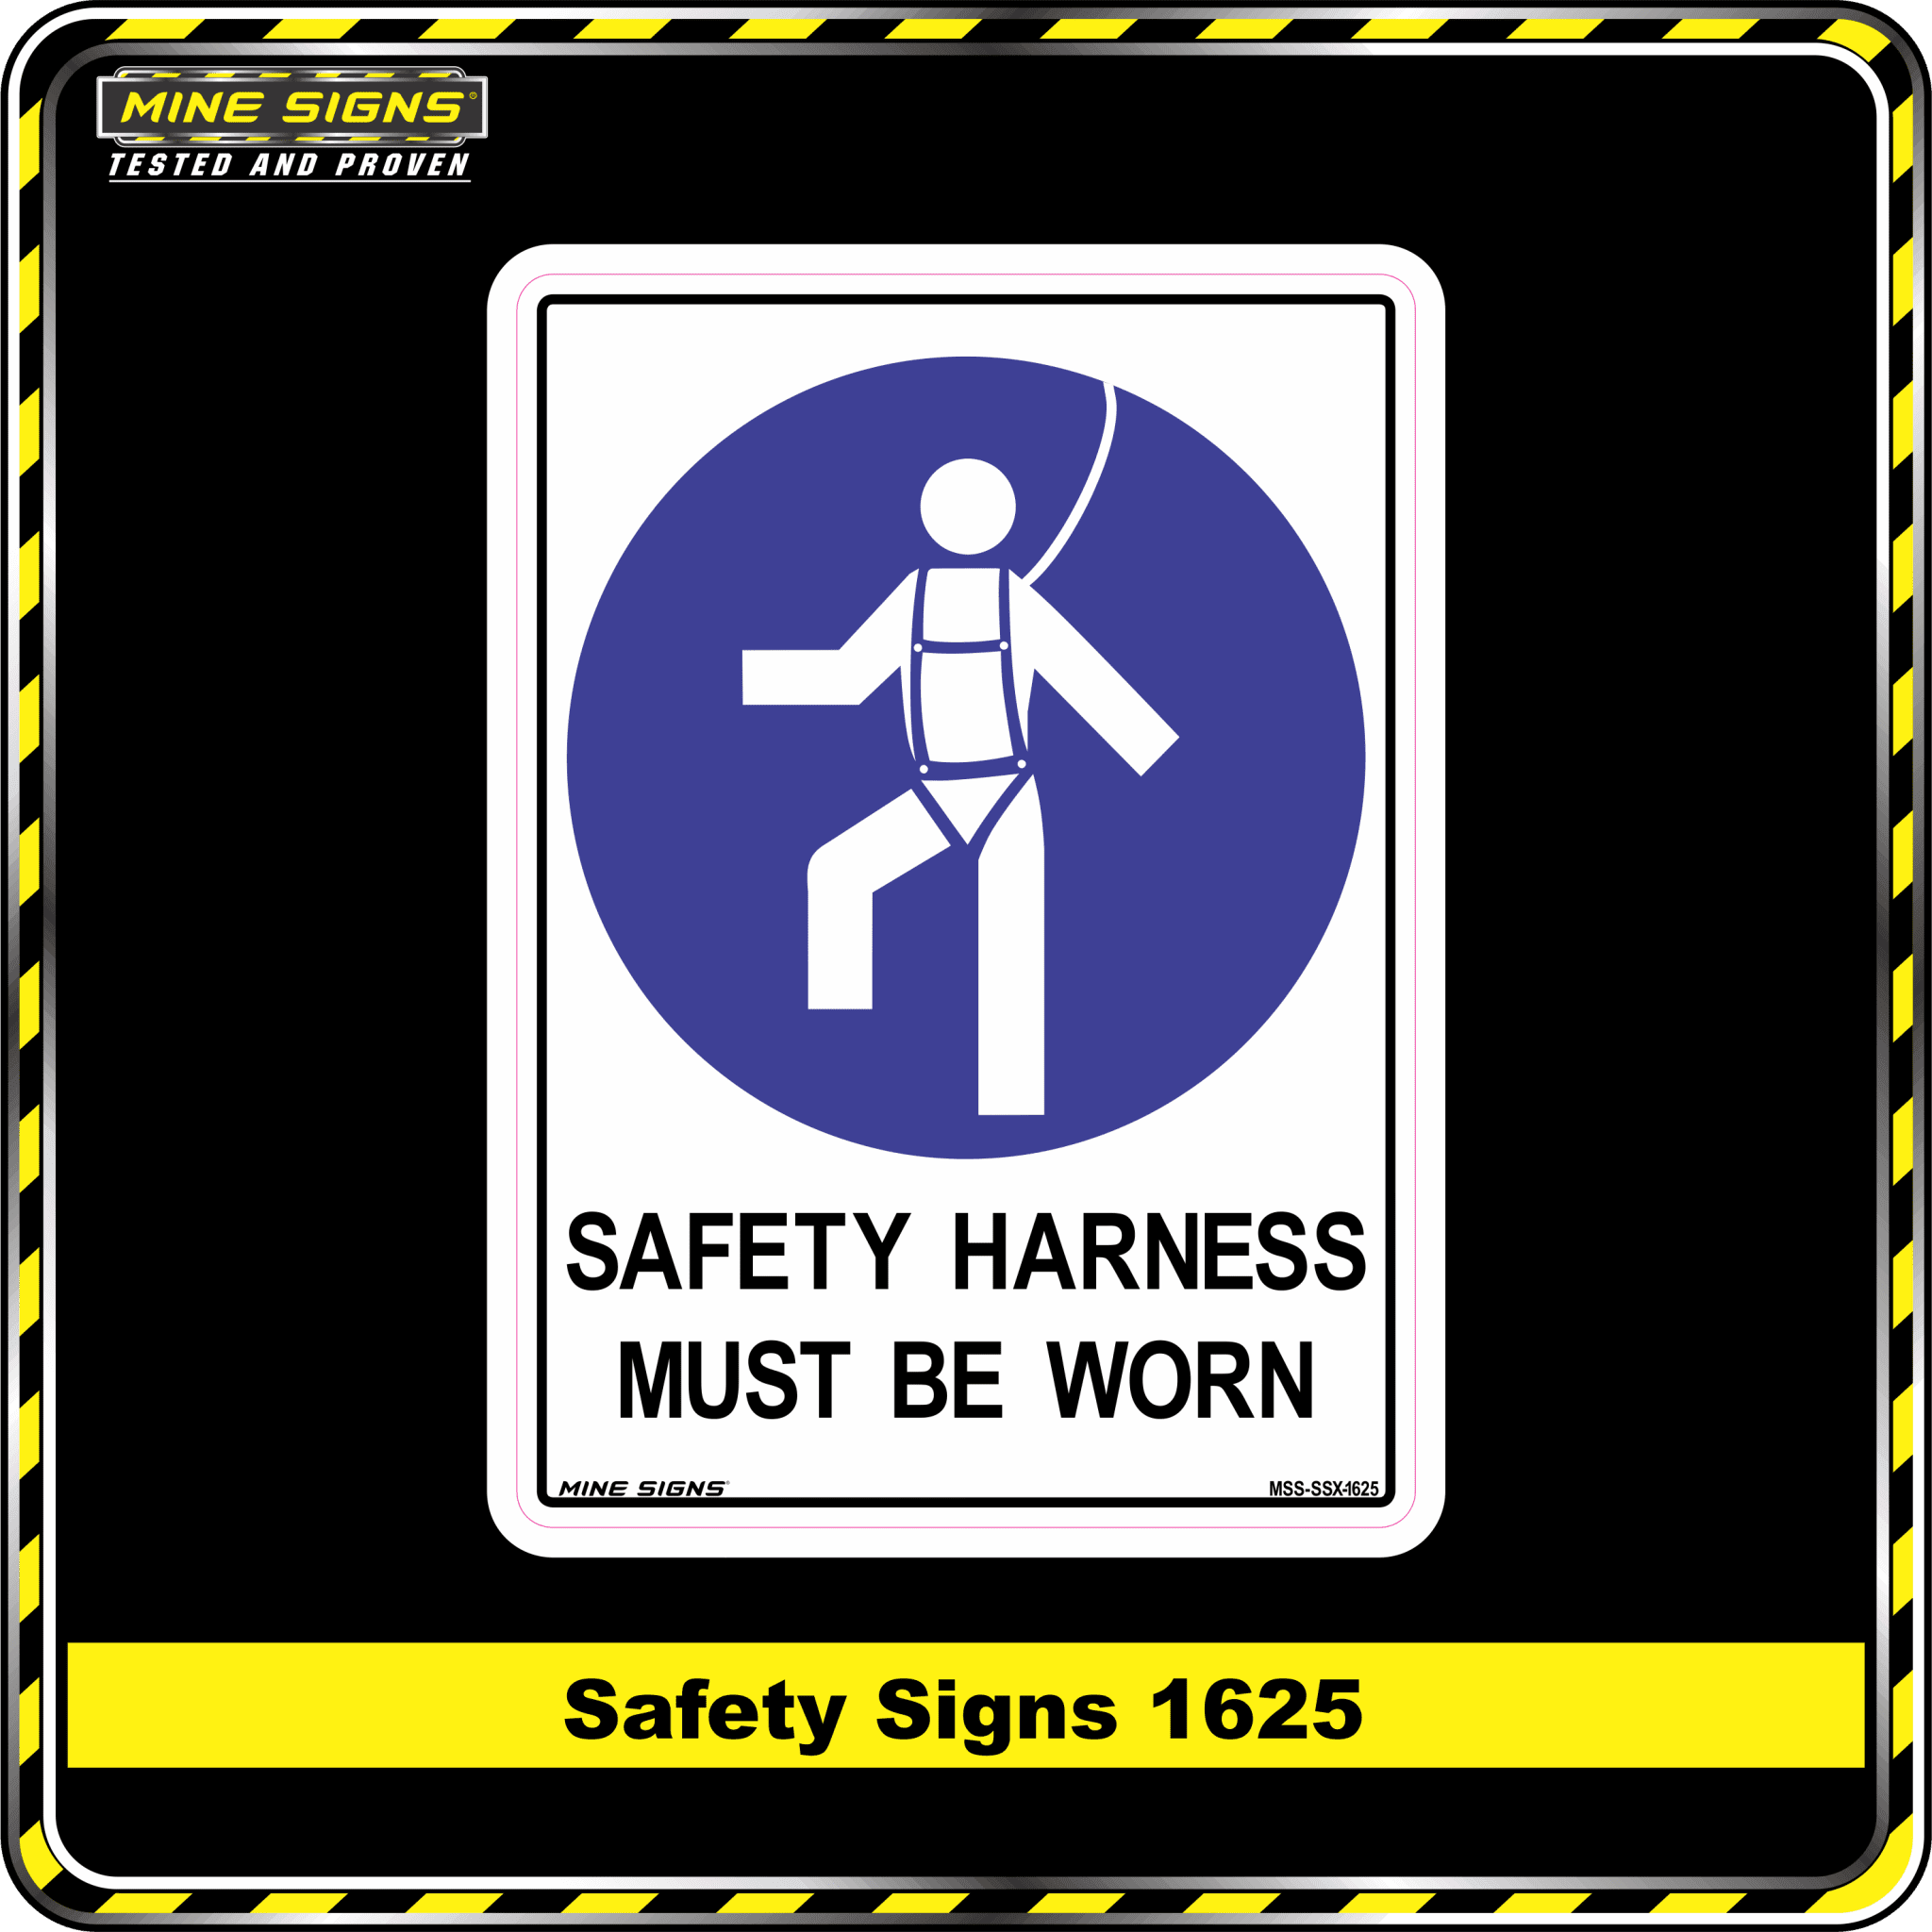 Mandatory Safety Harness Must Be Worn (Safety Sign 1625)